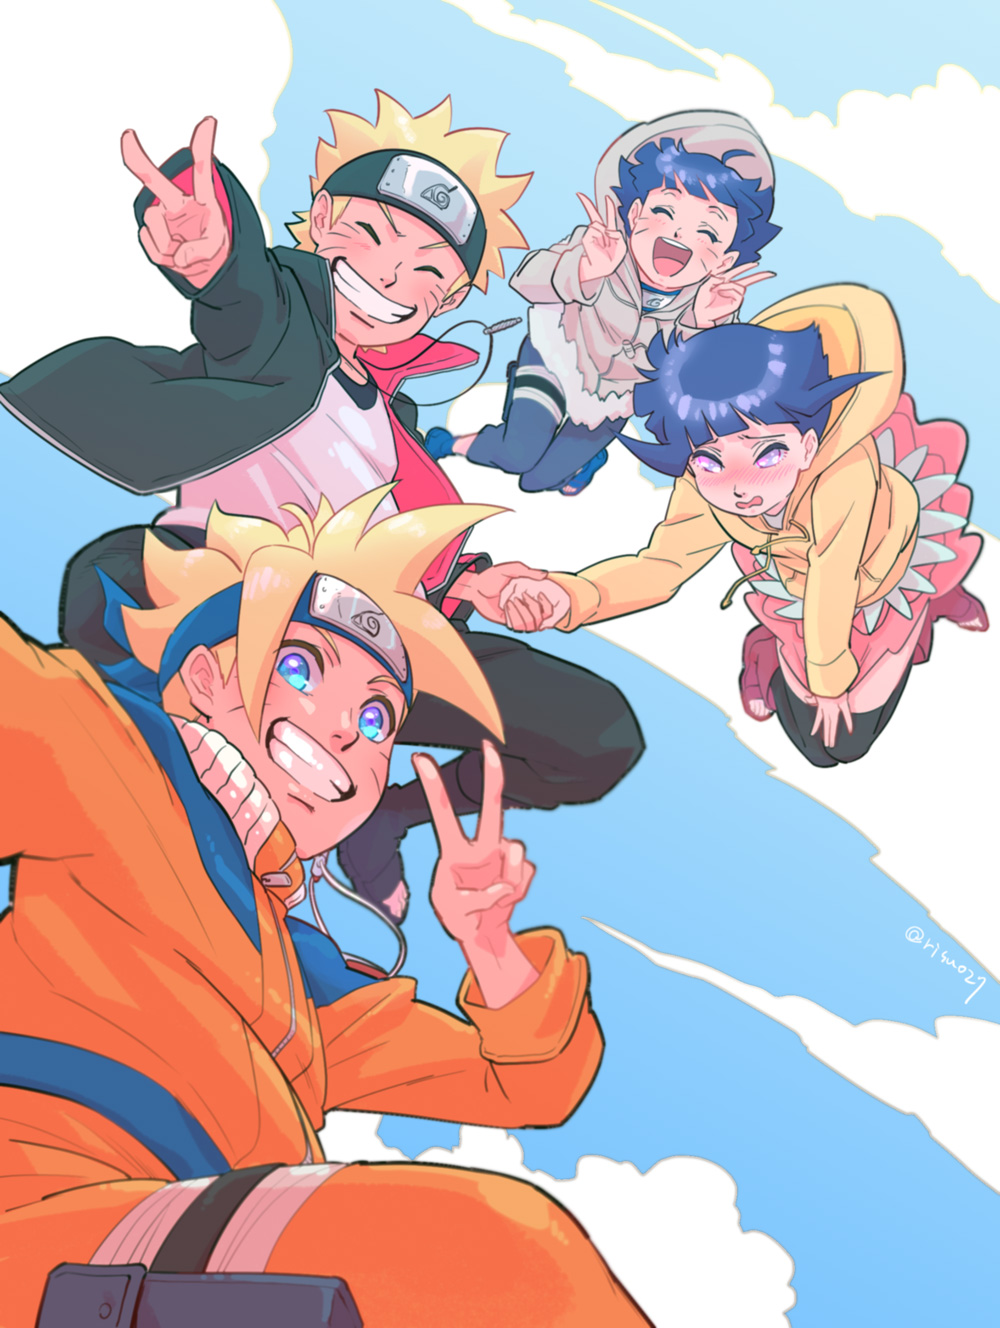 2boys 2girls ahoge blonde_hair blue_eyes boruto:_naruto_the_movie cosplay costume_switch family forehead_protector highres holding_hands hood hoodie hyuuga_hinata jacket lavender_eyes looking_at_viewer midair multiple_boys multiple_girls naruto purple_hair risuo smile spiky_hair time_paradox uzumaki_boruto uzumaki_himawari uzumaki_naruto v whiskers